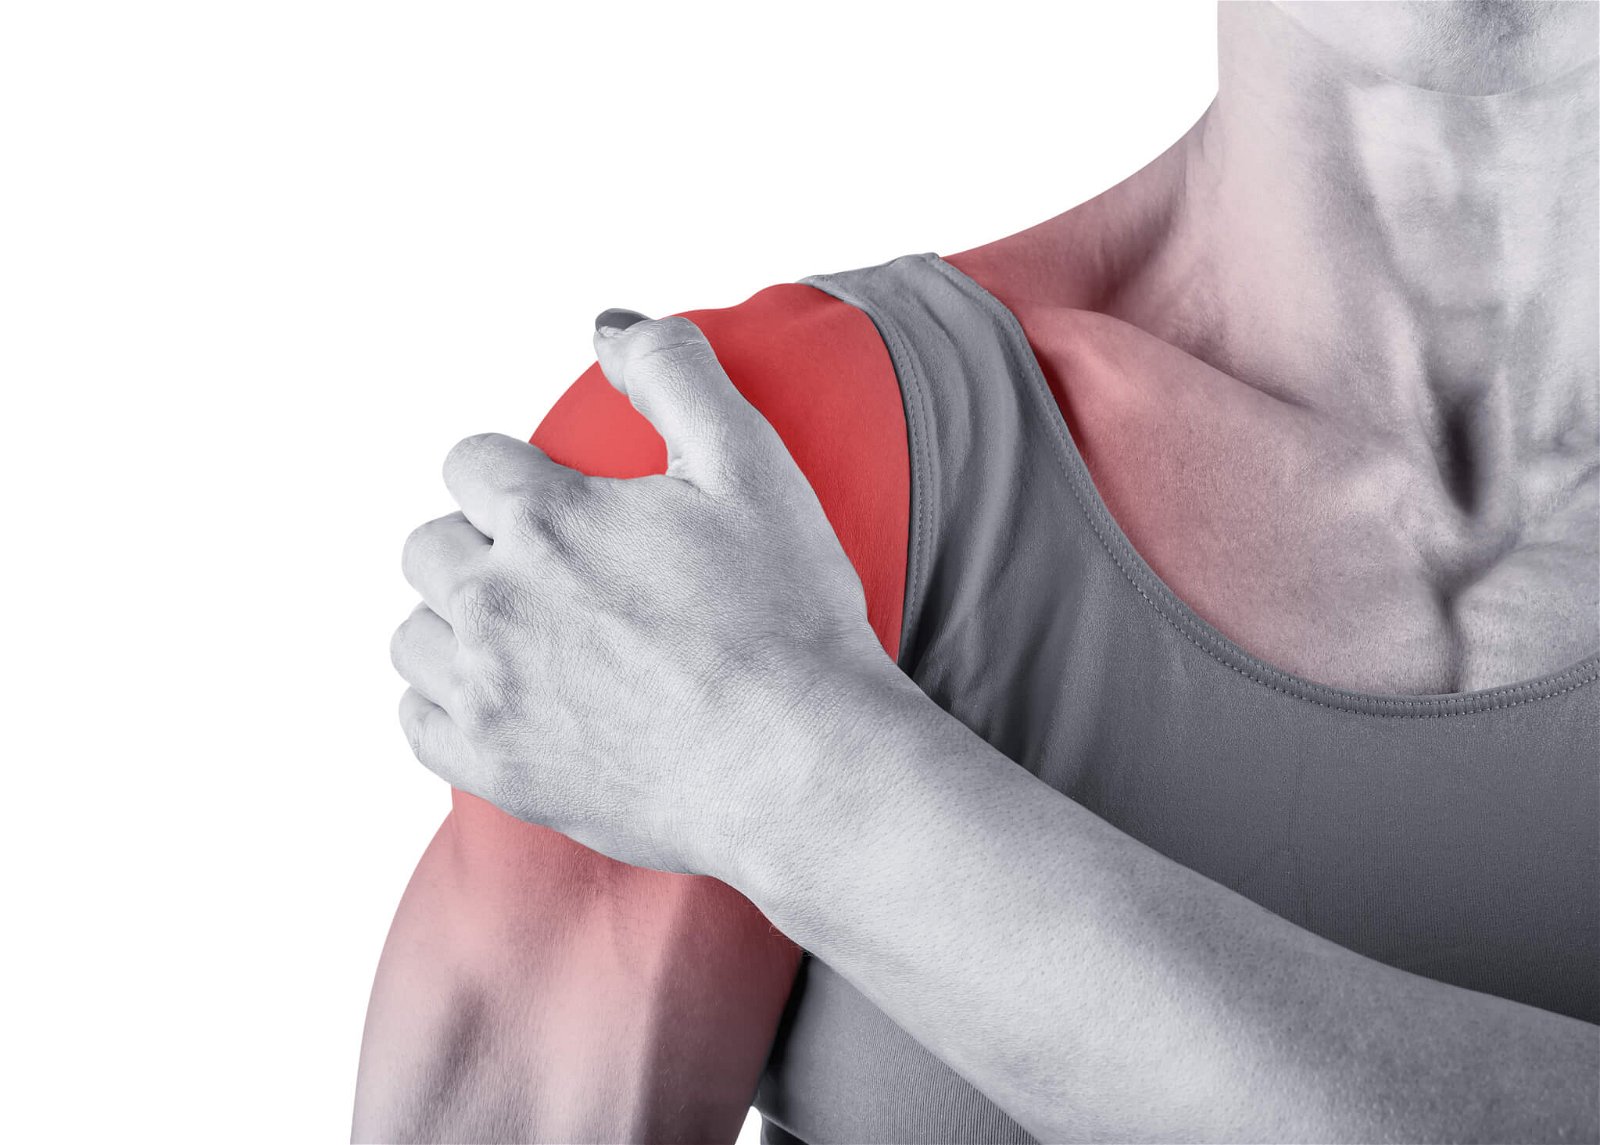 Shoulder injury – how to relieve pain?